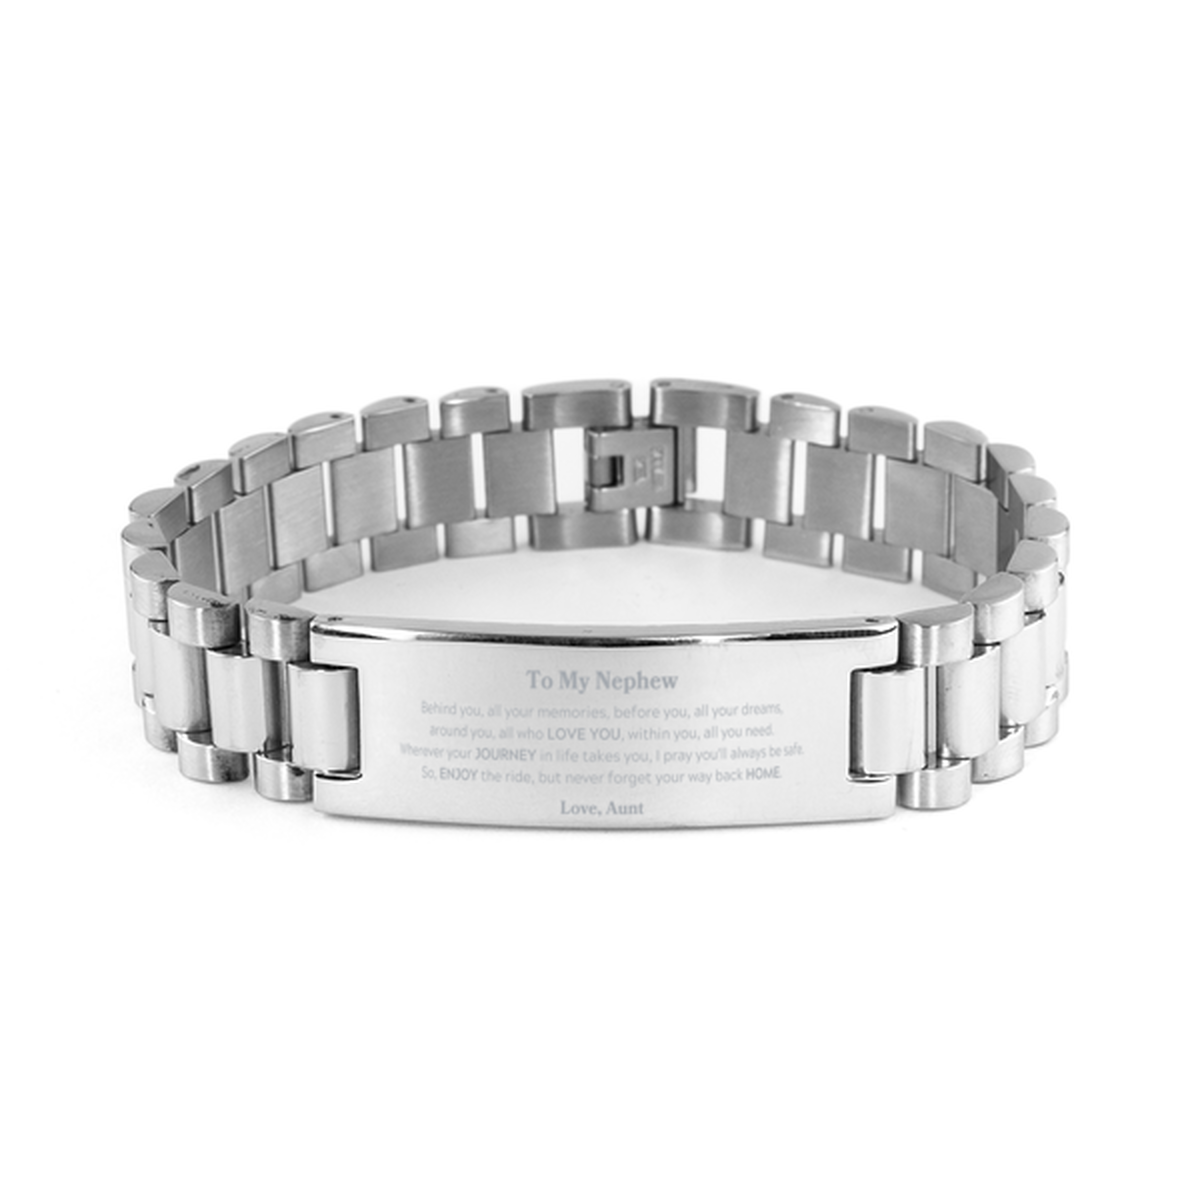 To My Nephew Graduation Gifts from Aunt, Nephew Ladder Stainless Steel Bracelet Christmas Birthday Gifts for Nephew Behind you, all your memories, before you, all your dreams. Love, Aunt